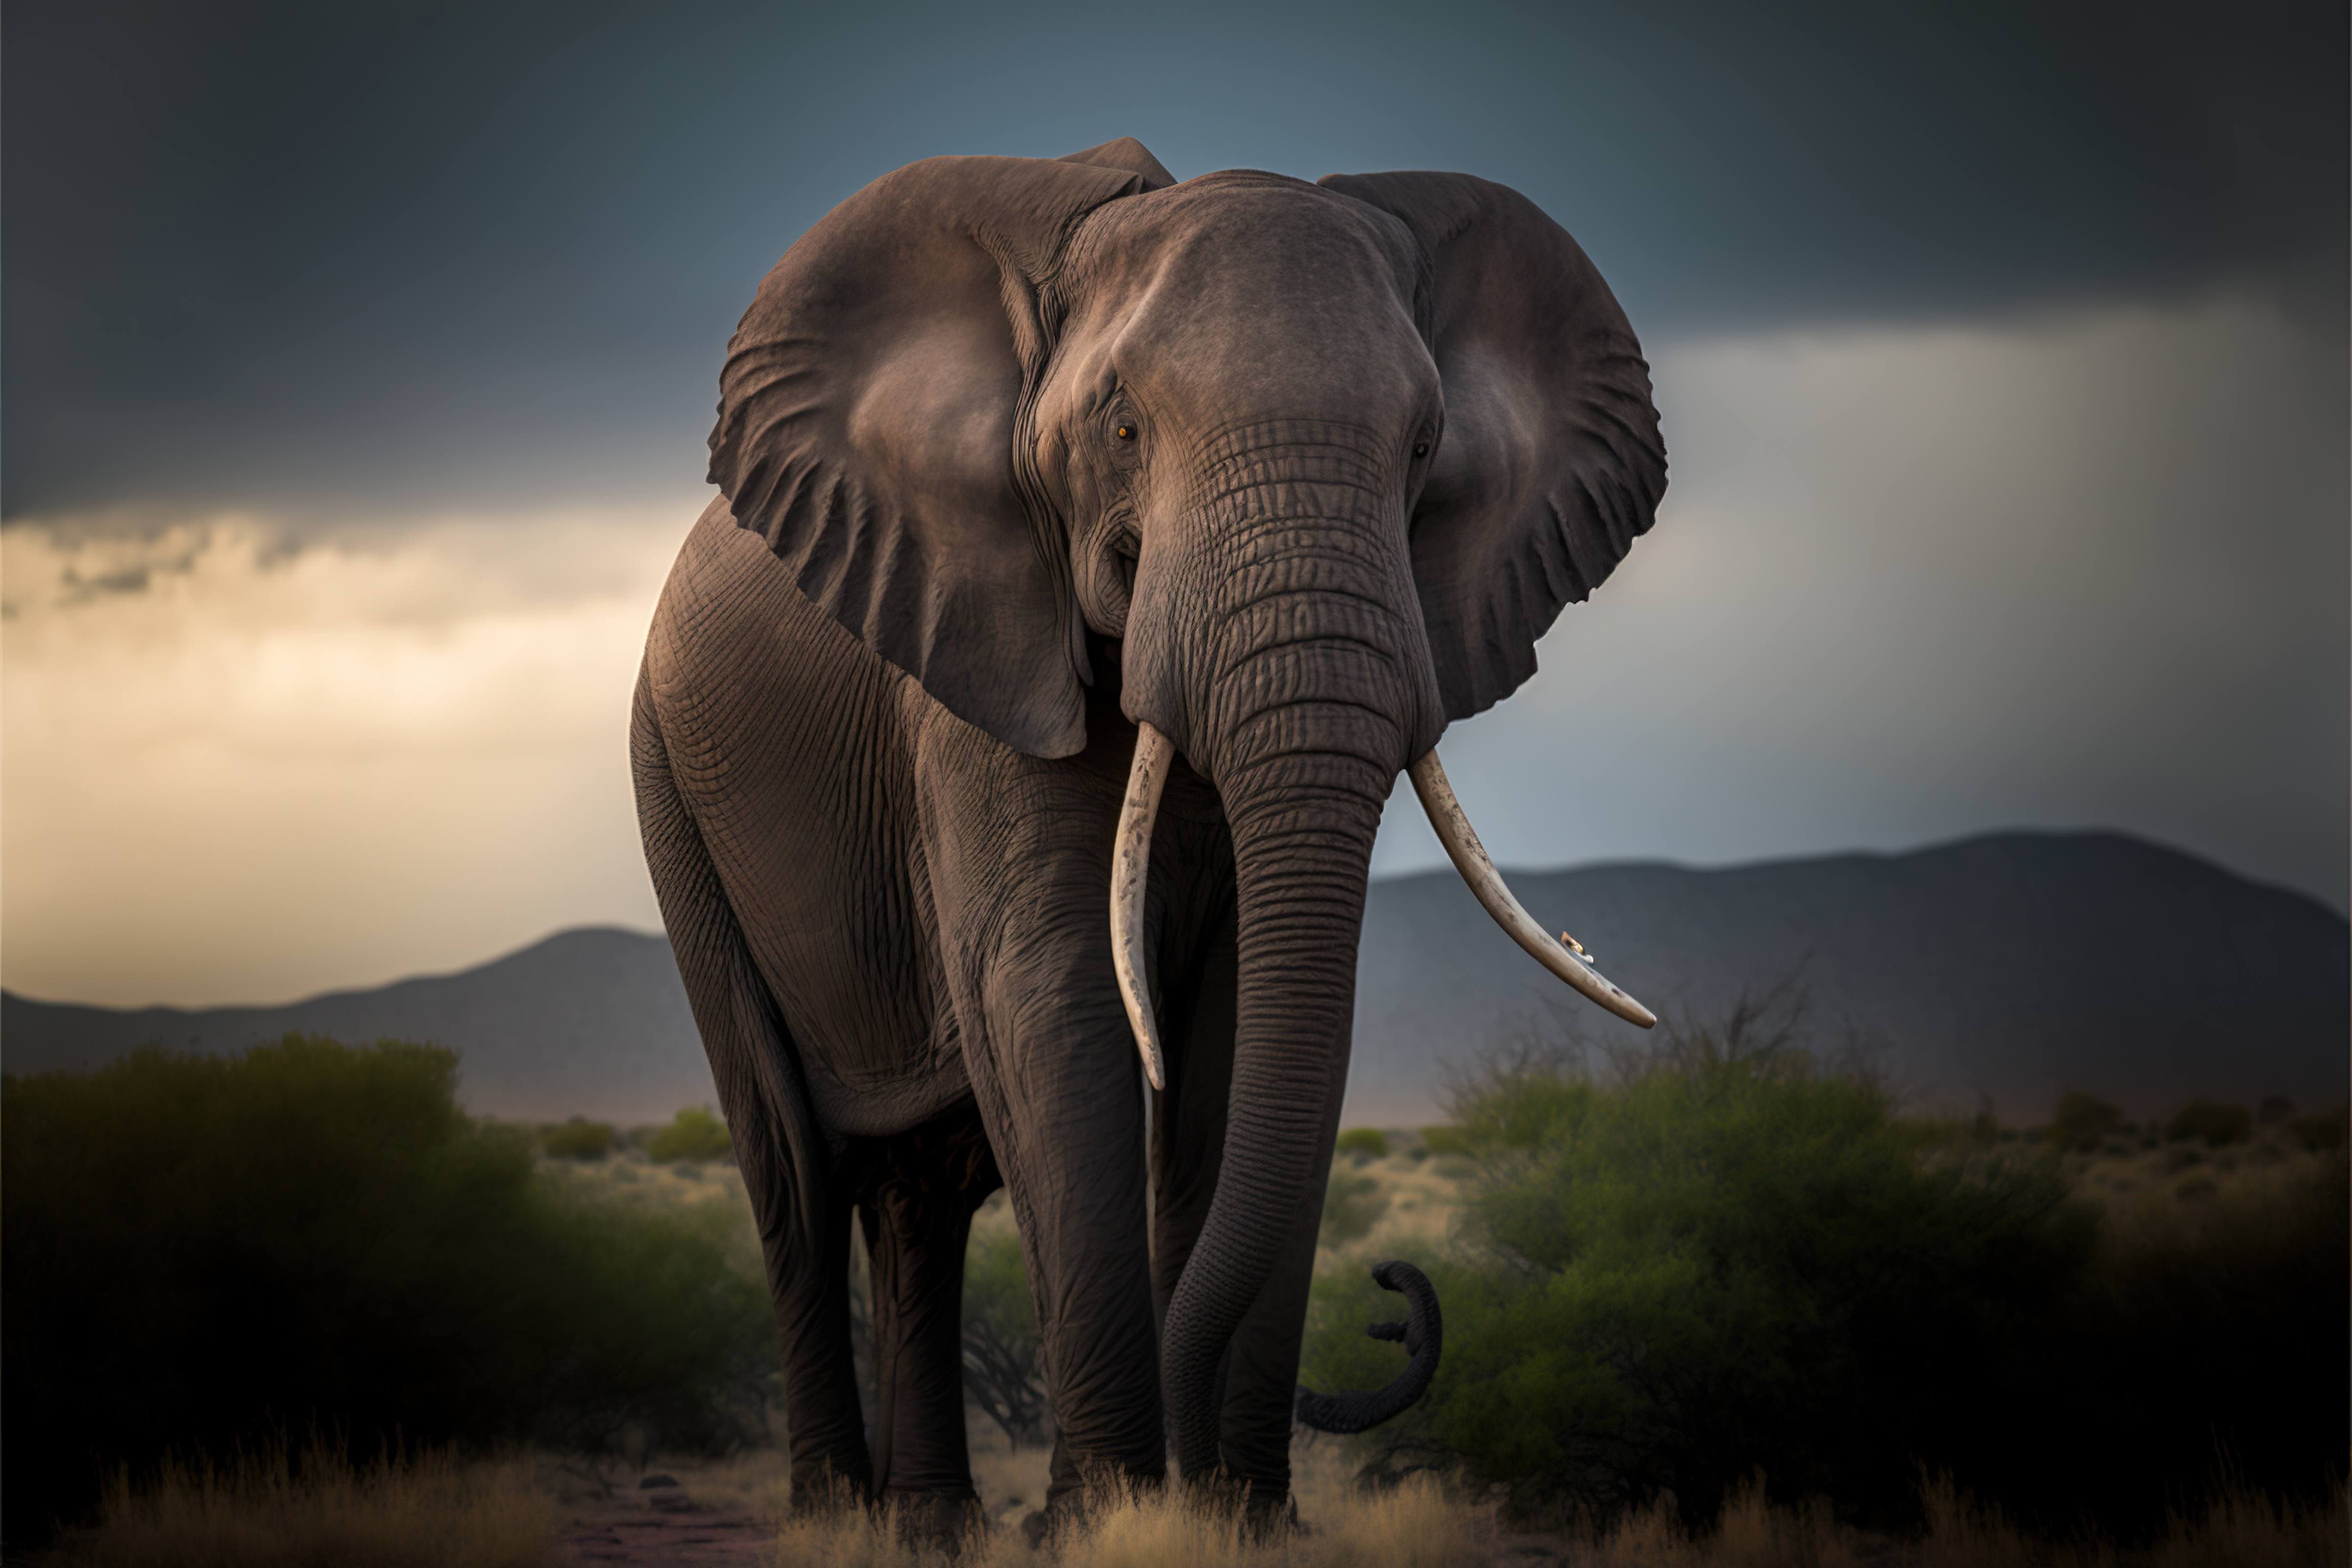 An elephant stands in the grass with a stormy sky behind it. - Elephant